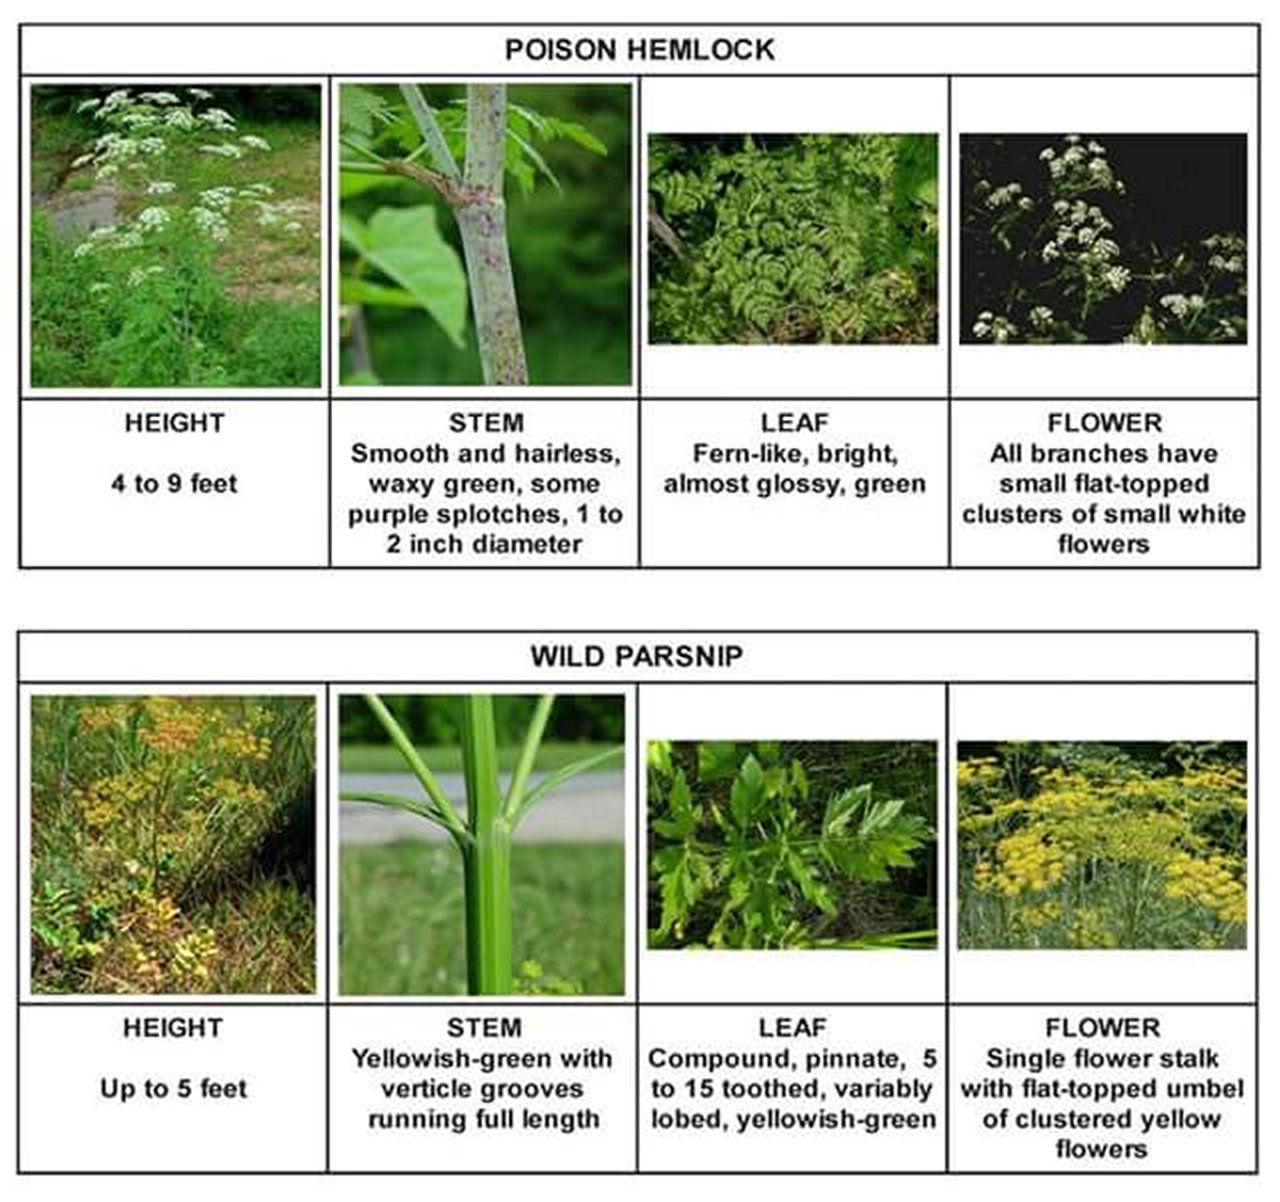 Difference between Poison Hemlock and Wild Parsnip